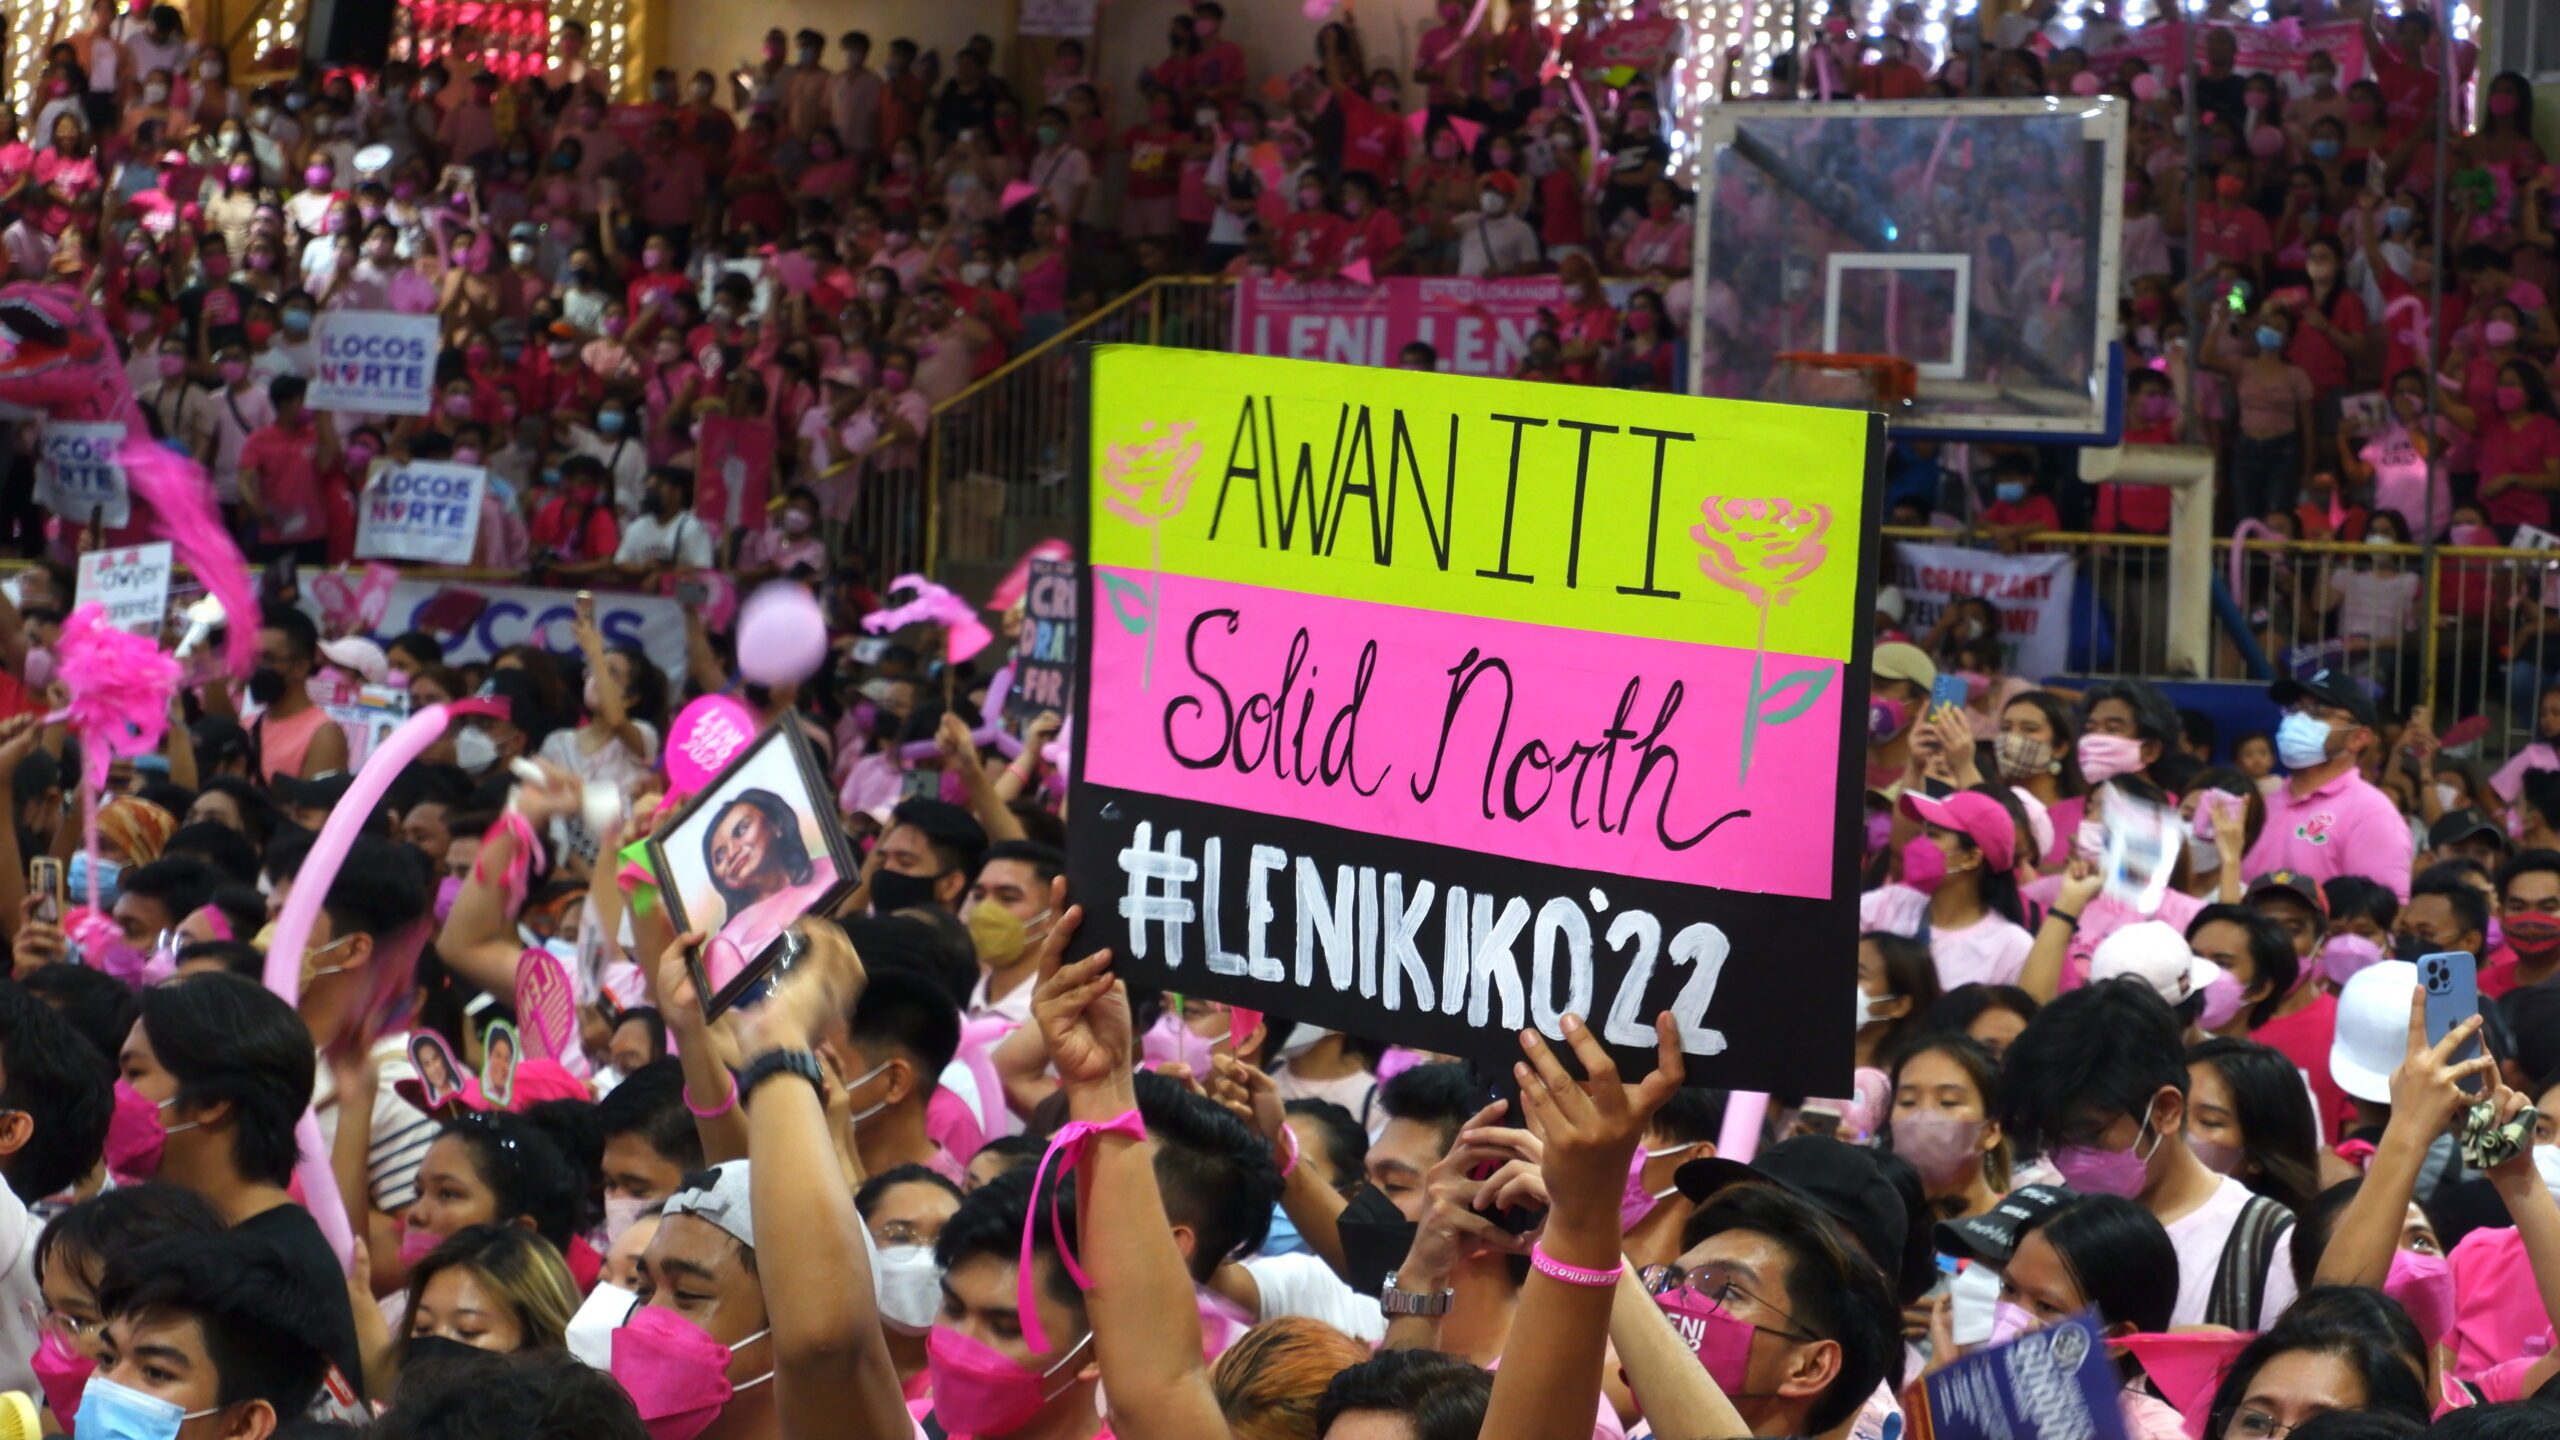 IN PHOTOS: A wave of pink takes over La Union in Robredo rally